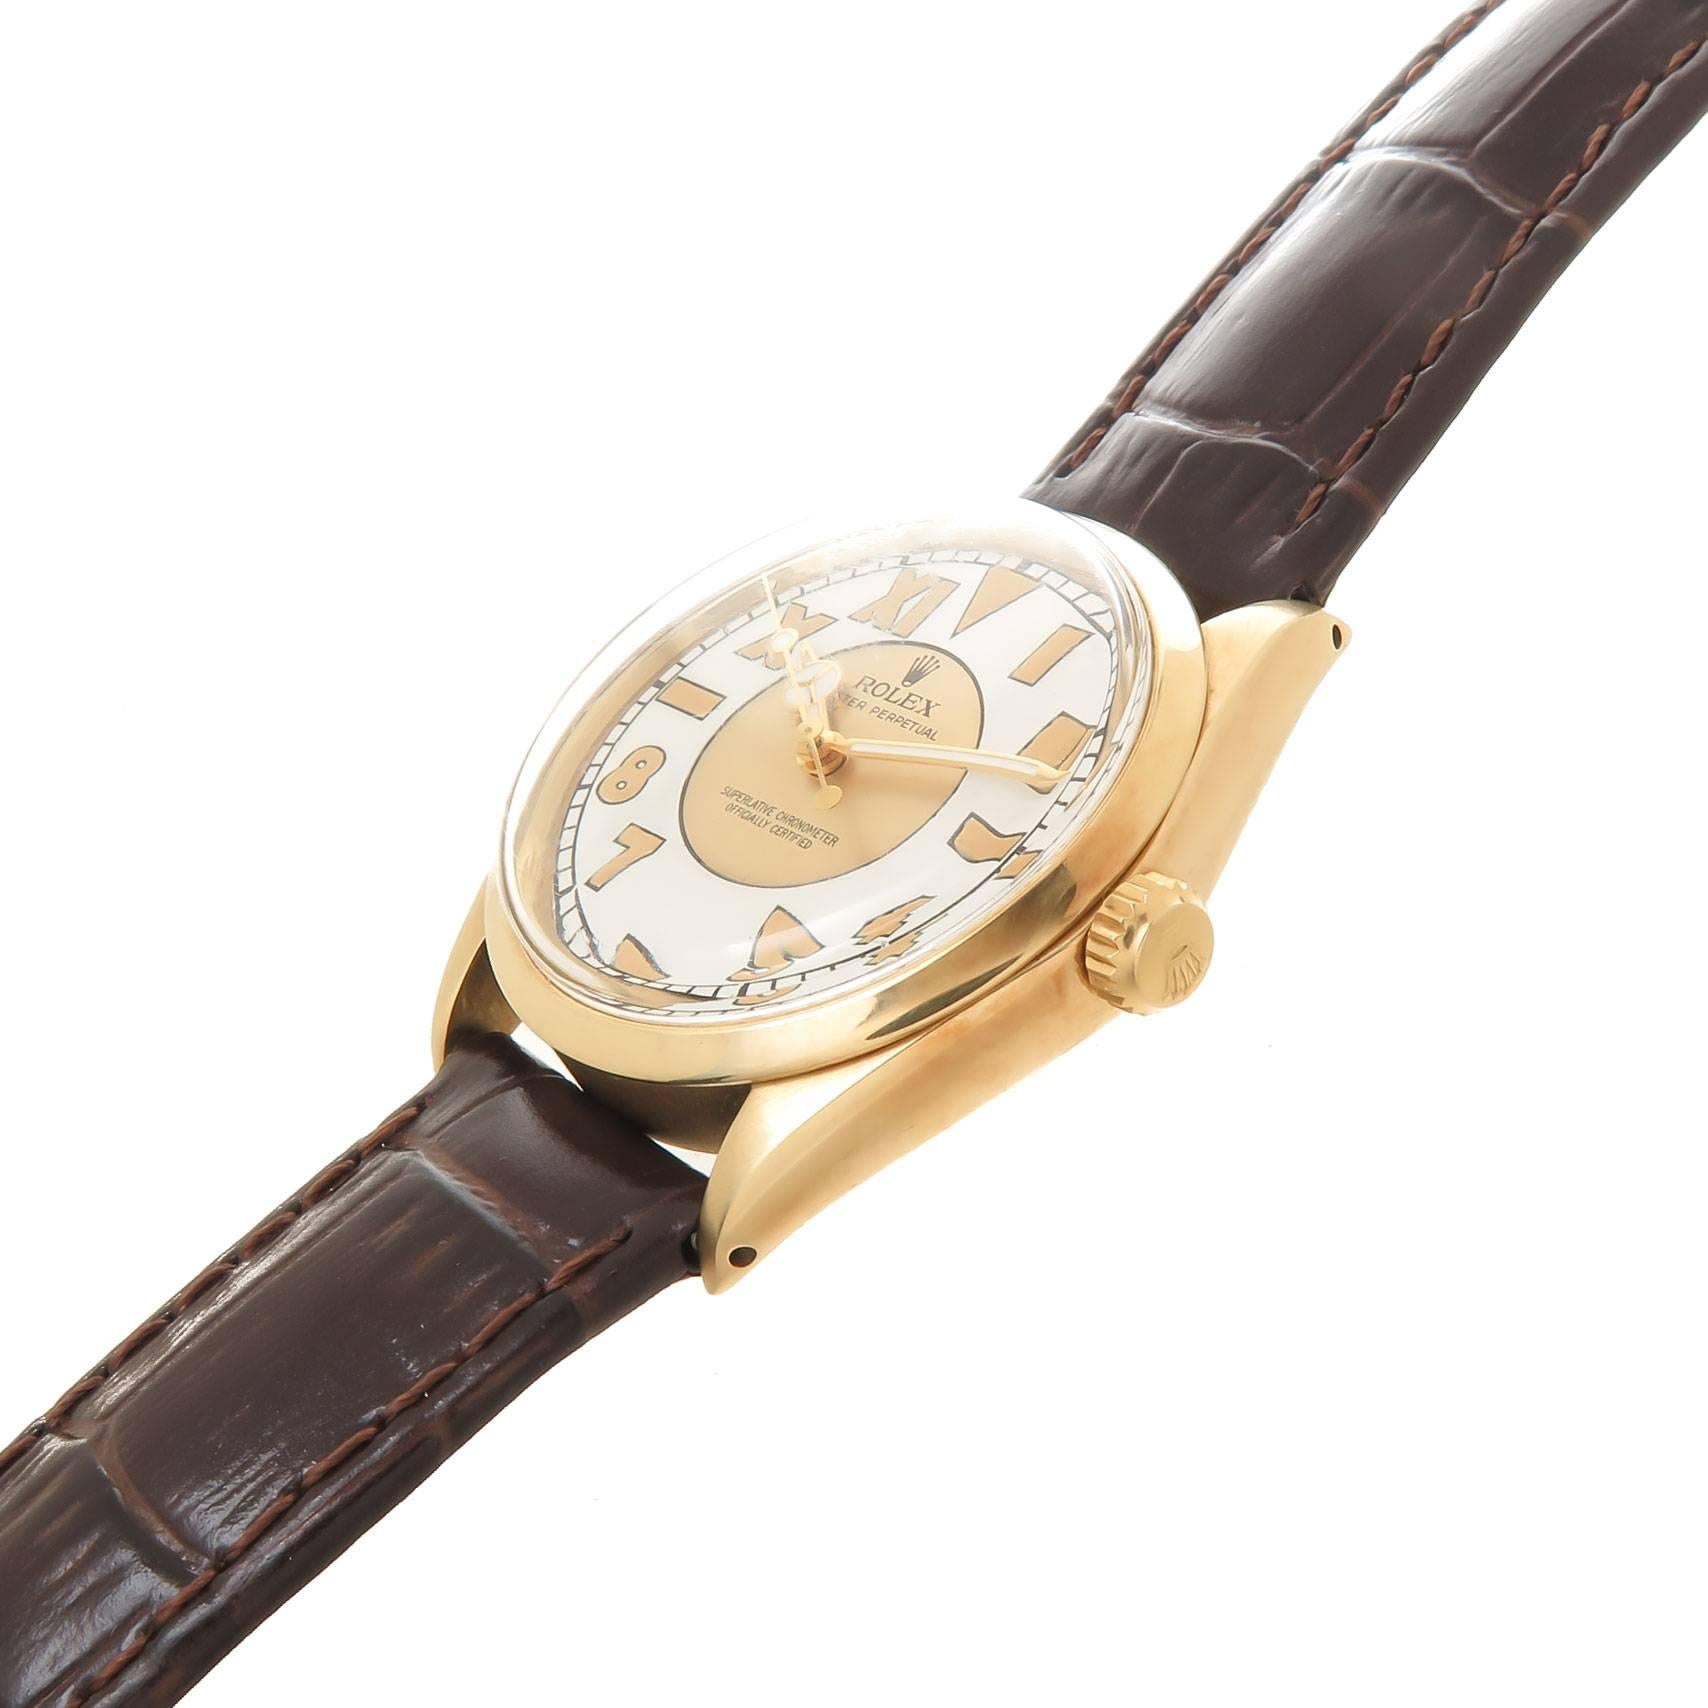 Circa 1948 Rolex Oyster perpetual Reference 1002 Wrist Watch 14K yellow Gold 34 MM 2 Piece Oyster case, Caliber 1570, 26 Jewel Automatic, self winding movement. Newly restored California style period dial with luminous markers, Mercedes hands and a